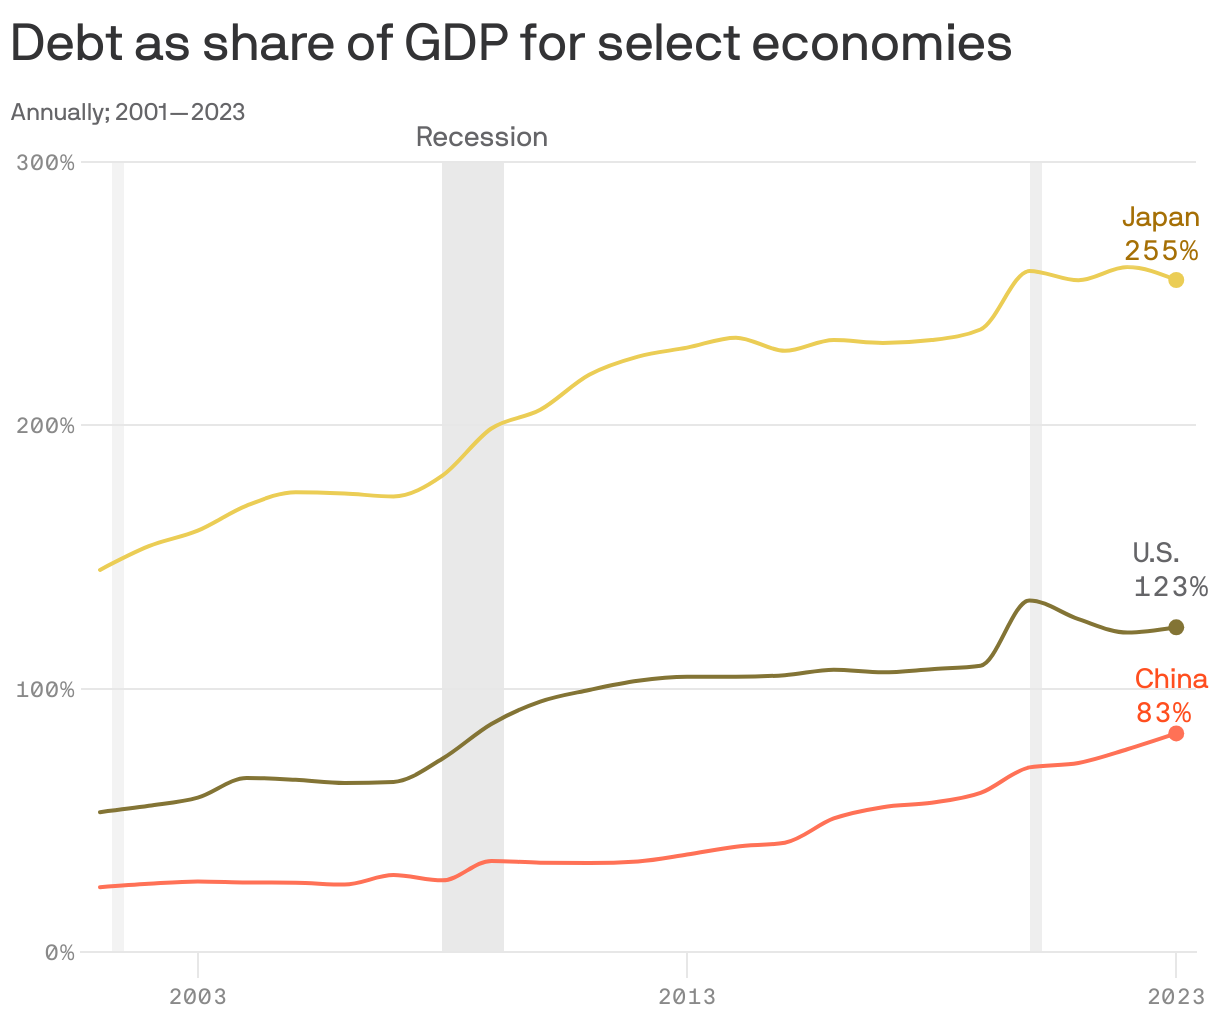 Debt as share of GDP for select economies